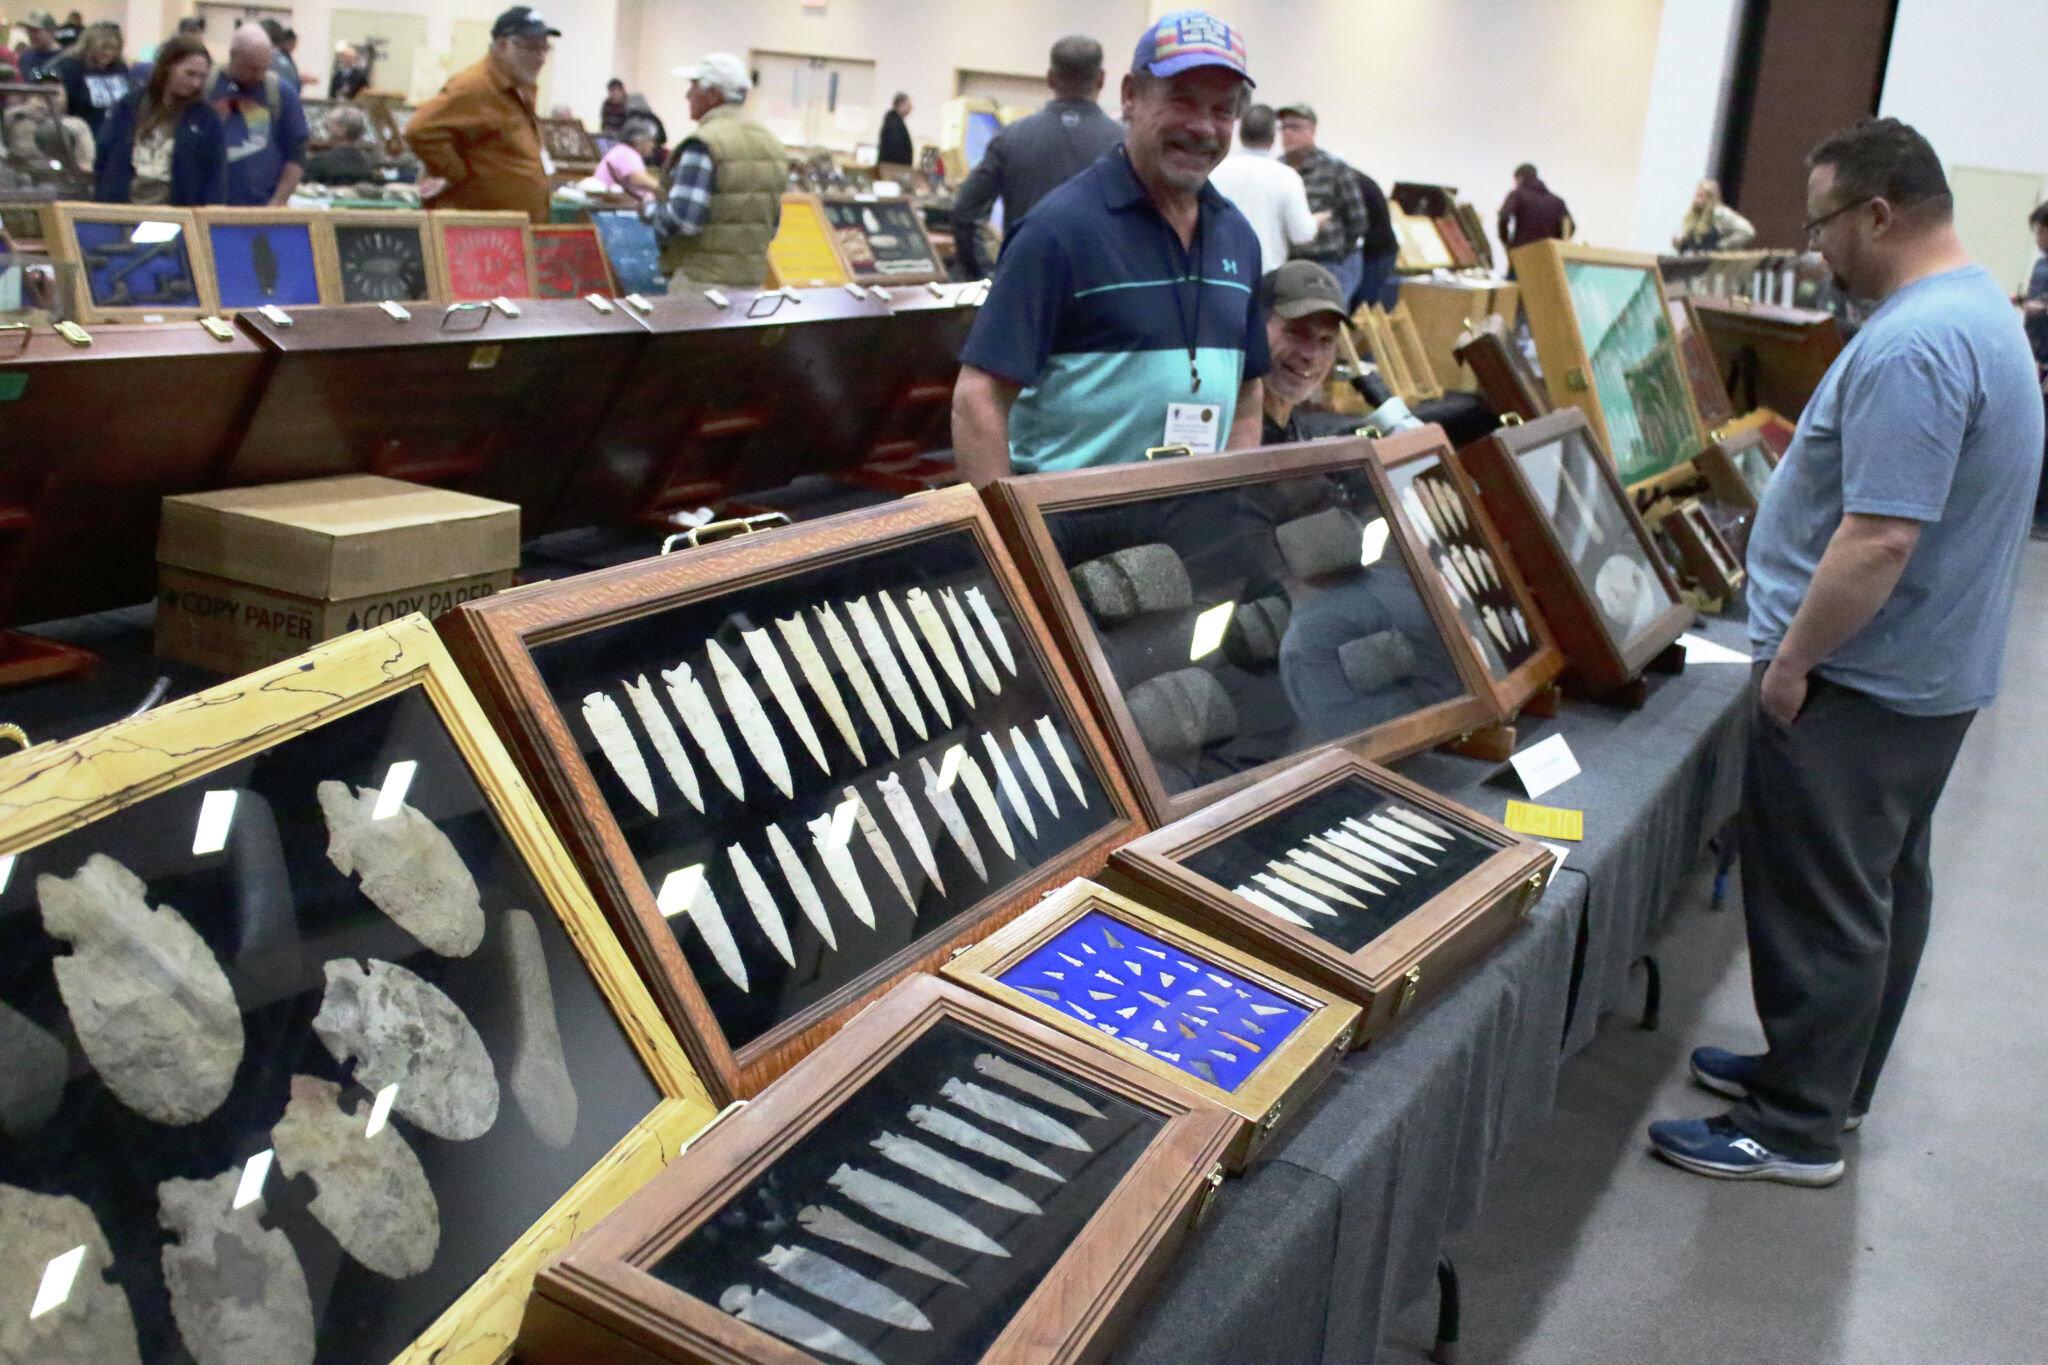 Collectors pack Collinsville’s Artifact Show